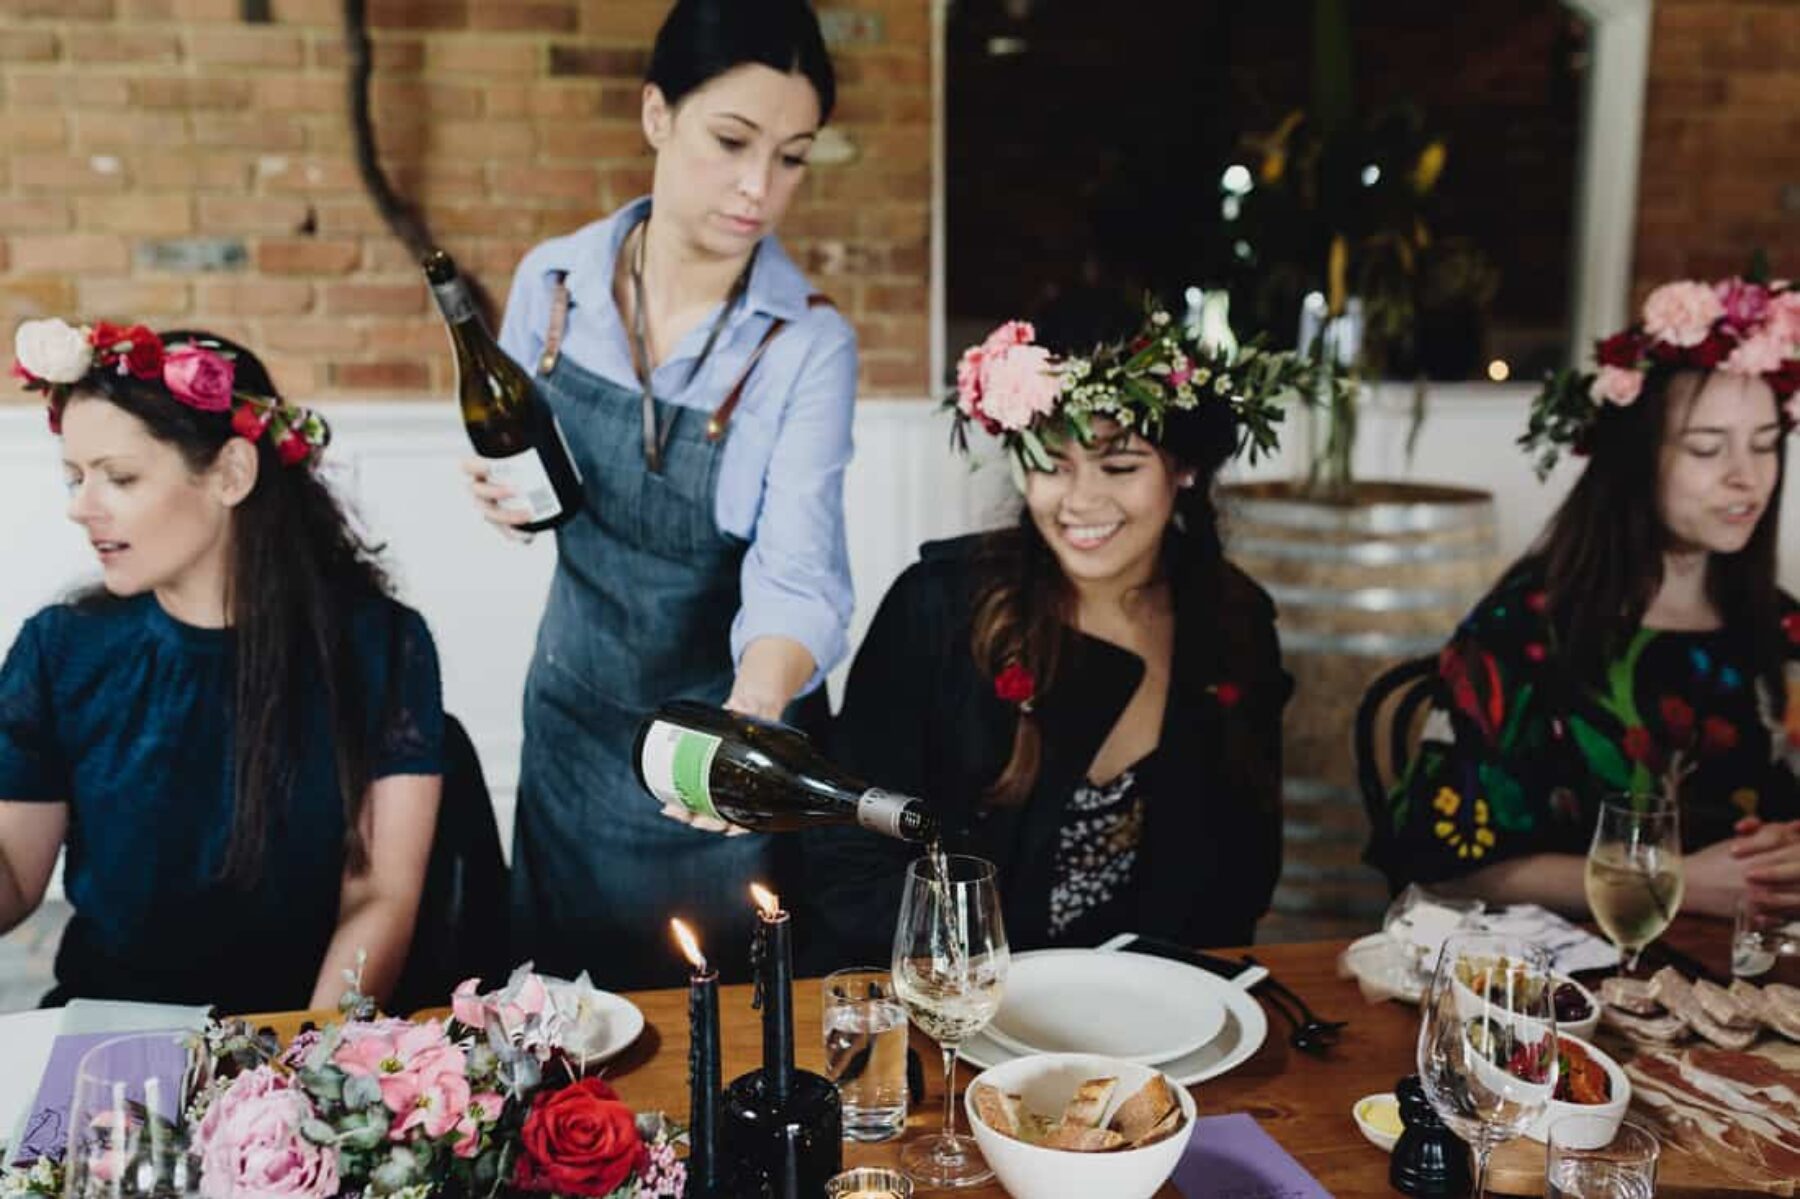 Stylish foodie hen's day at The Farm Yarra Valley